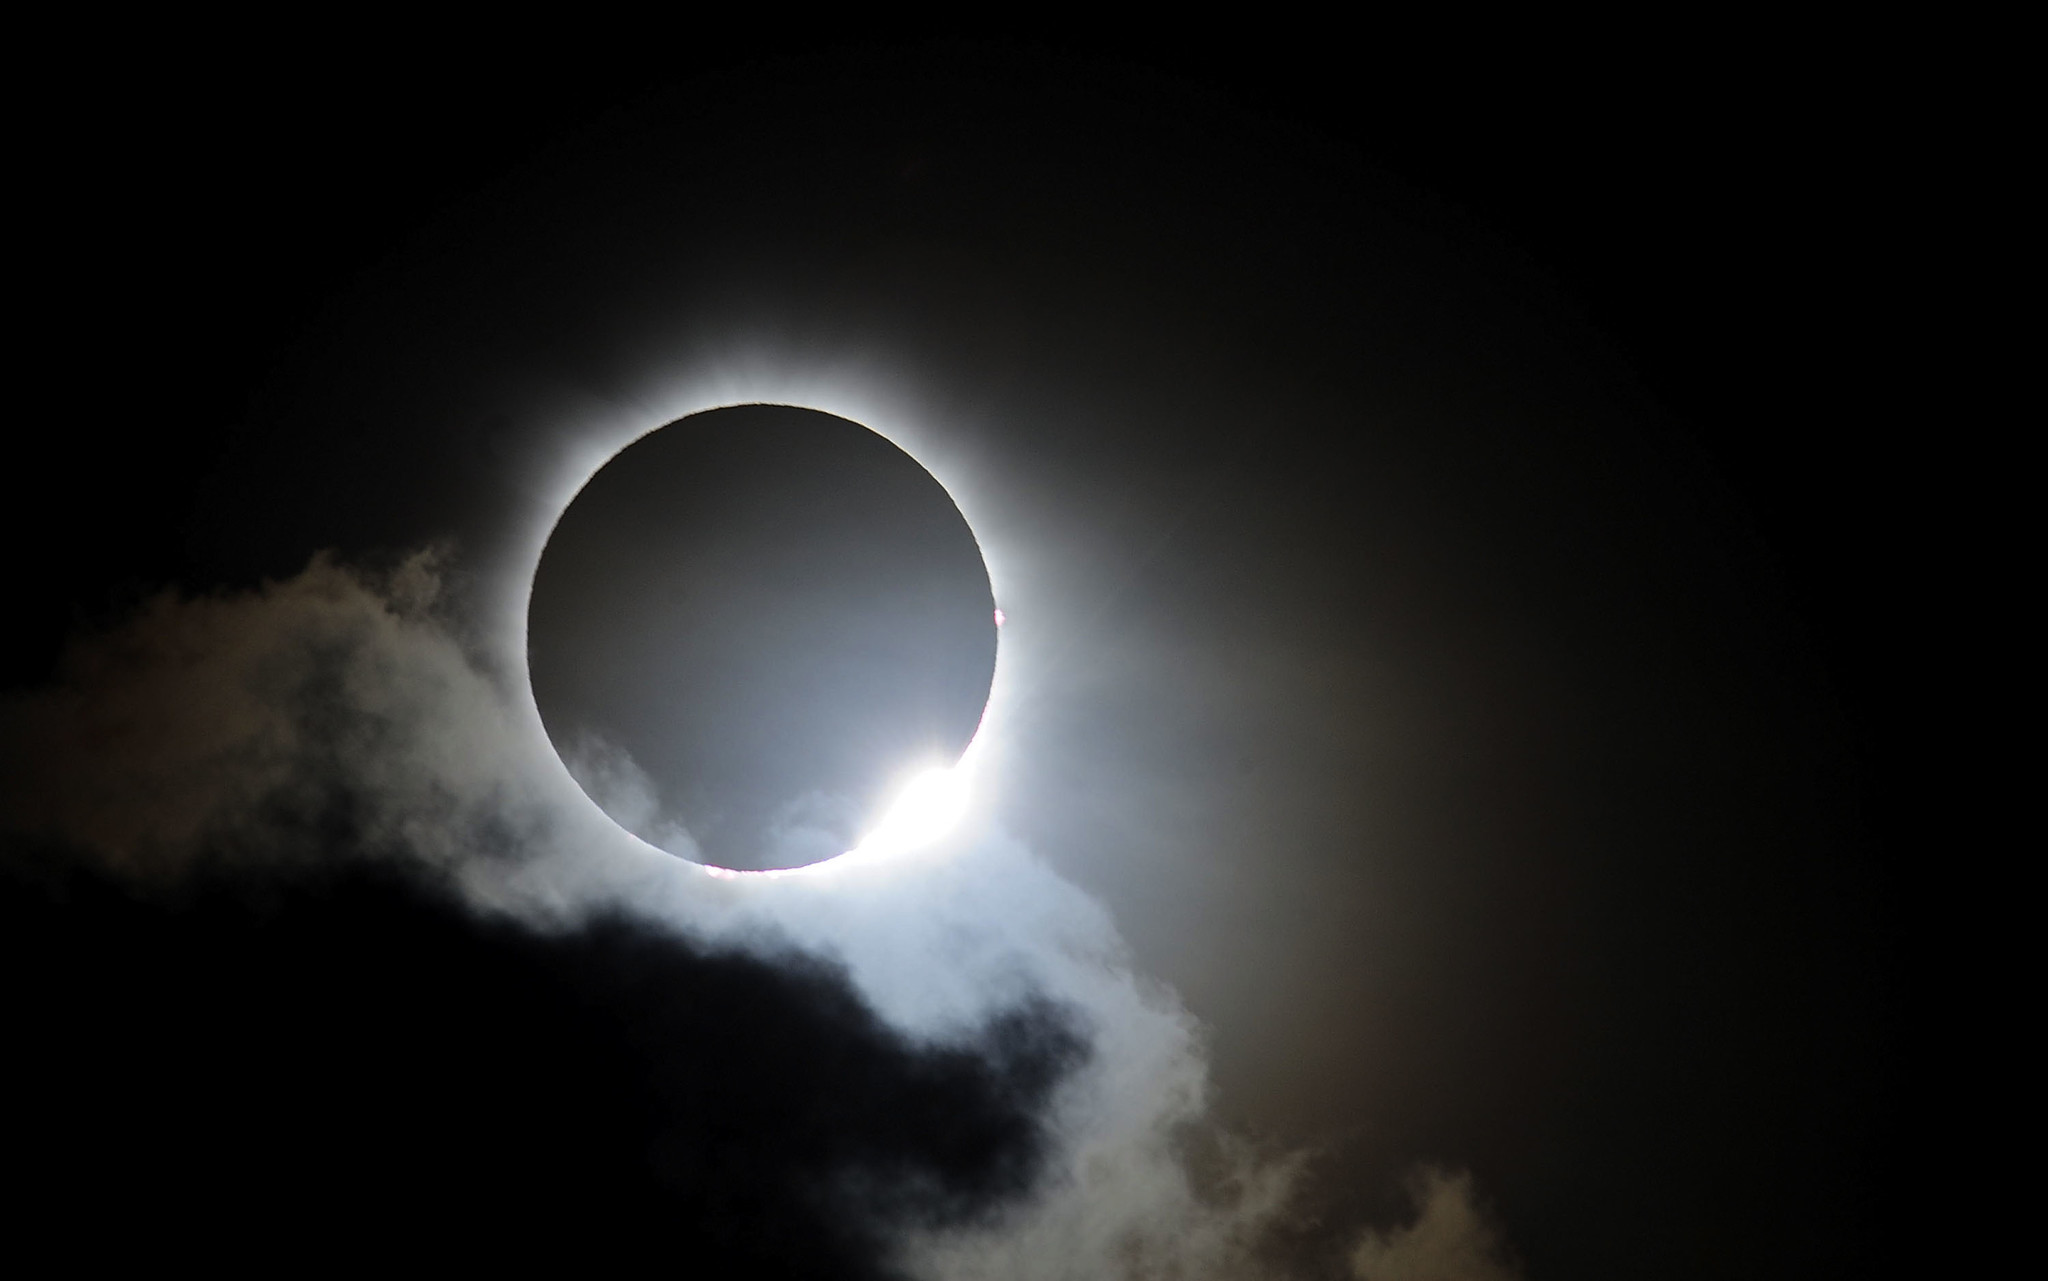 Solar Eclipse 2017 Experience: A Moment in Totality